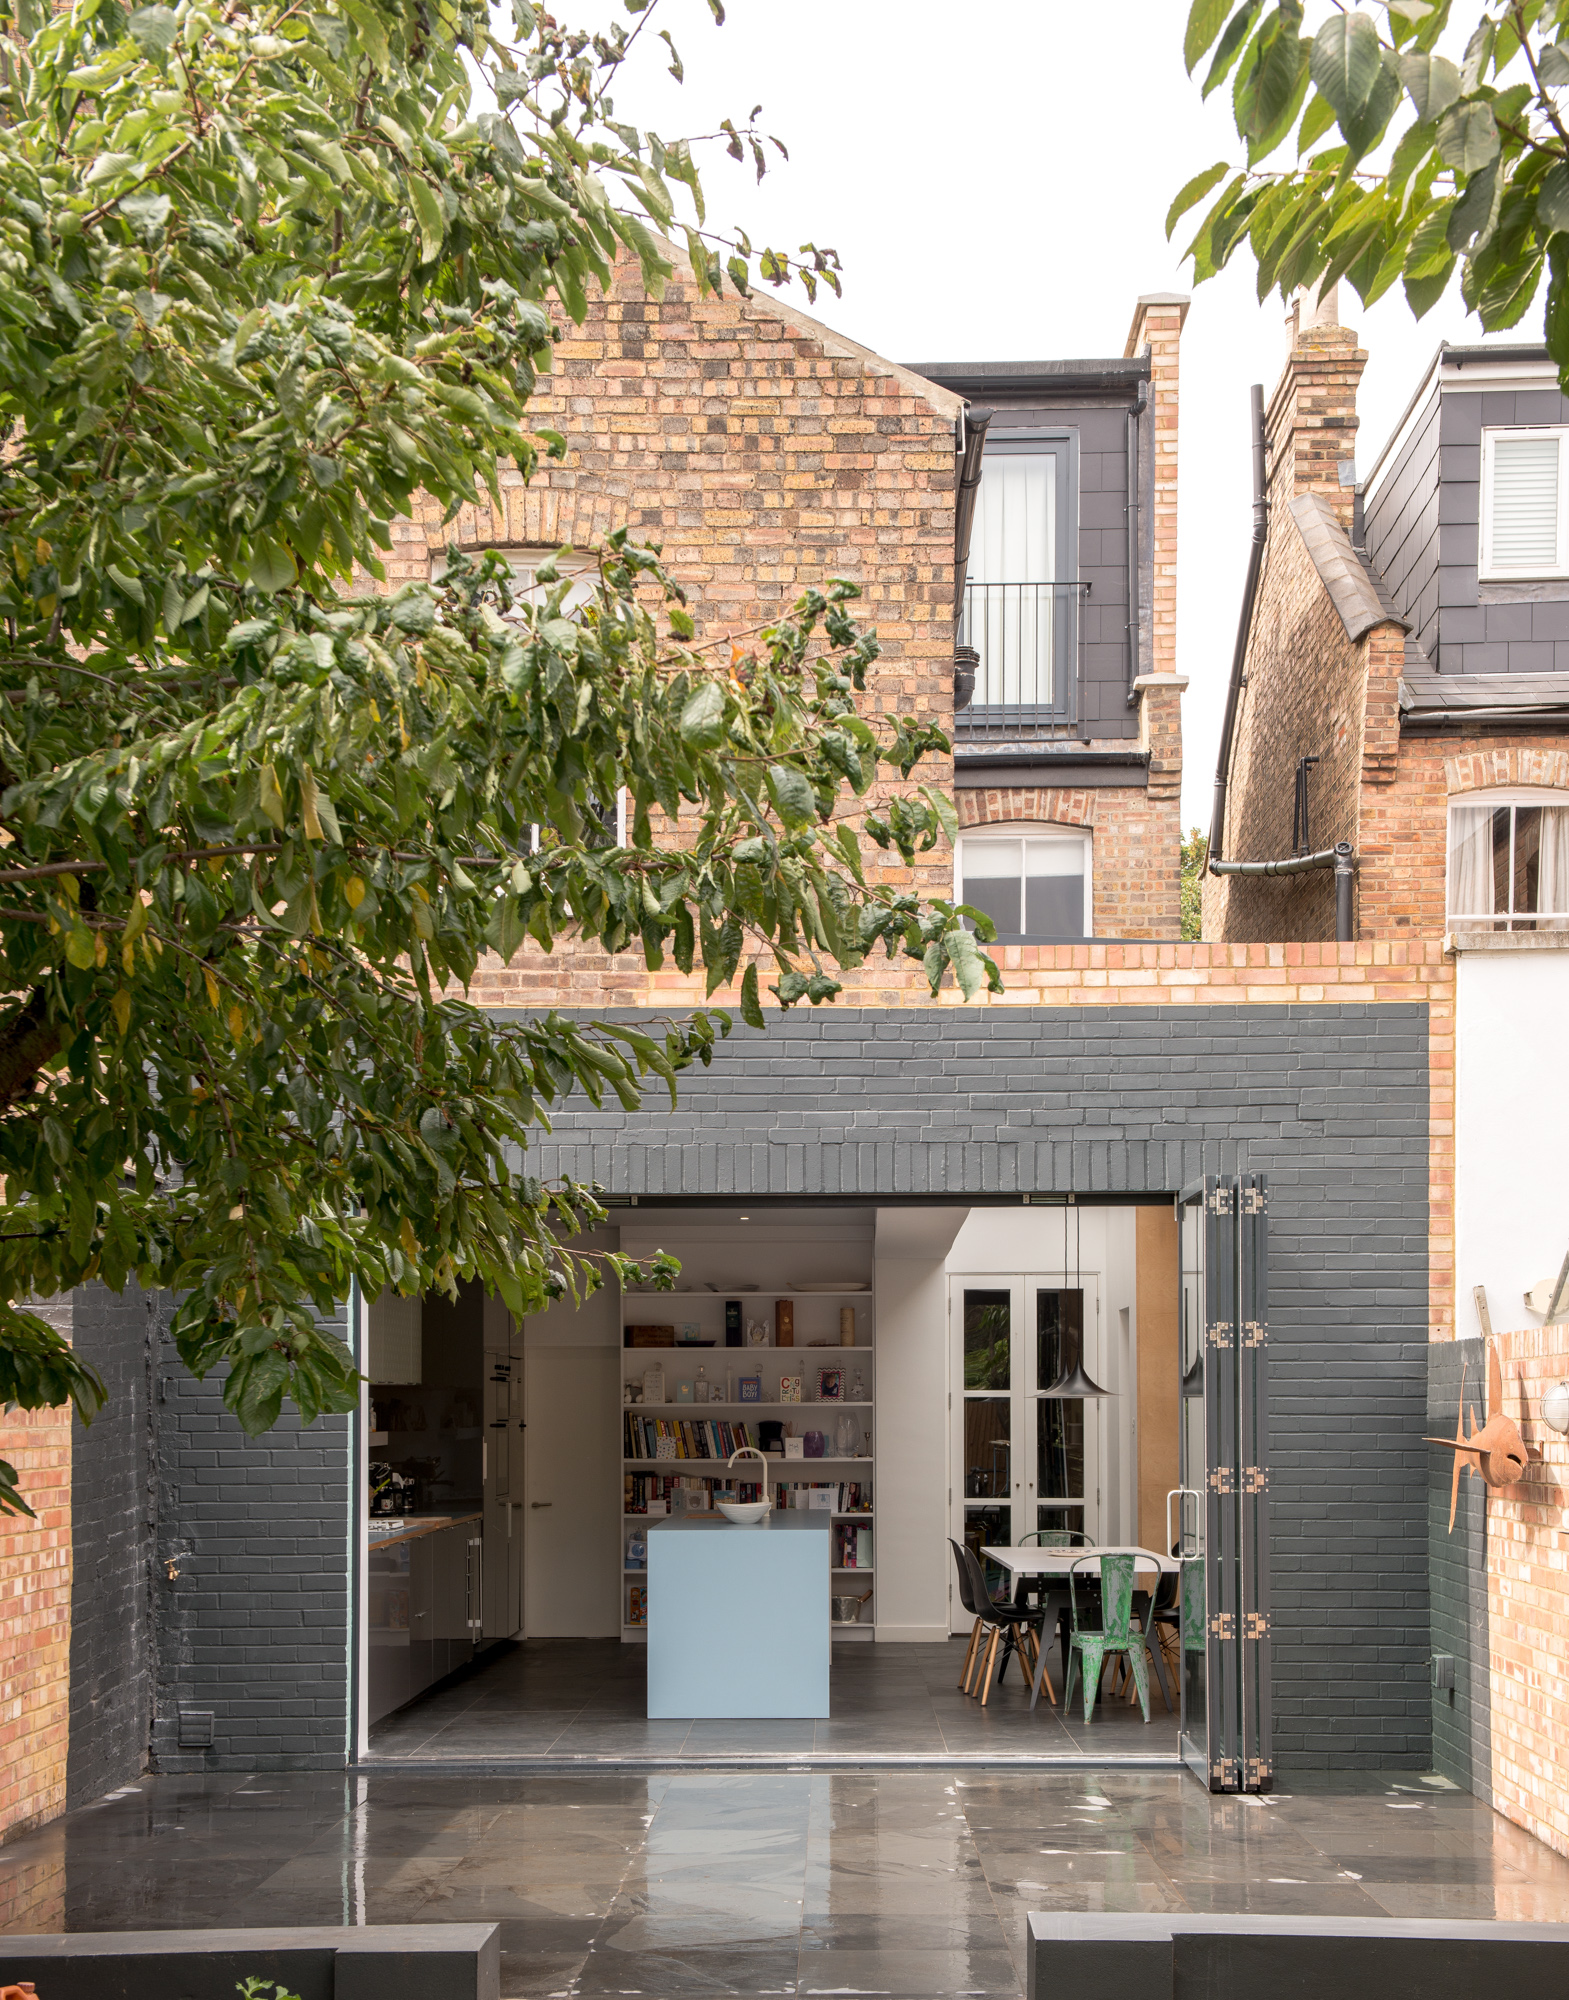  Private House in London, Kitchen extension by Buchanan Partnership Architects.
Photographs by Richard Stonehouse. 